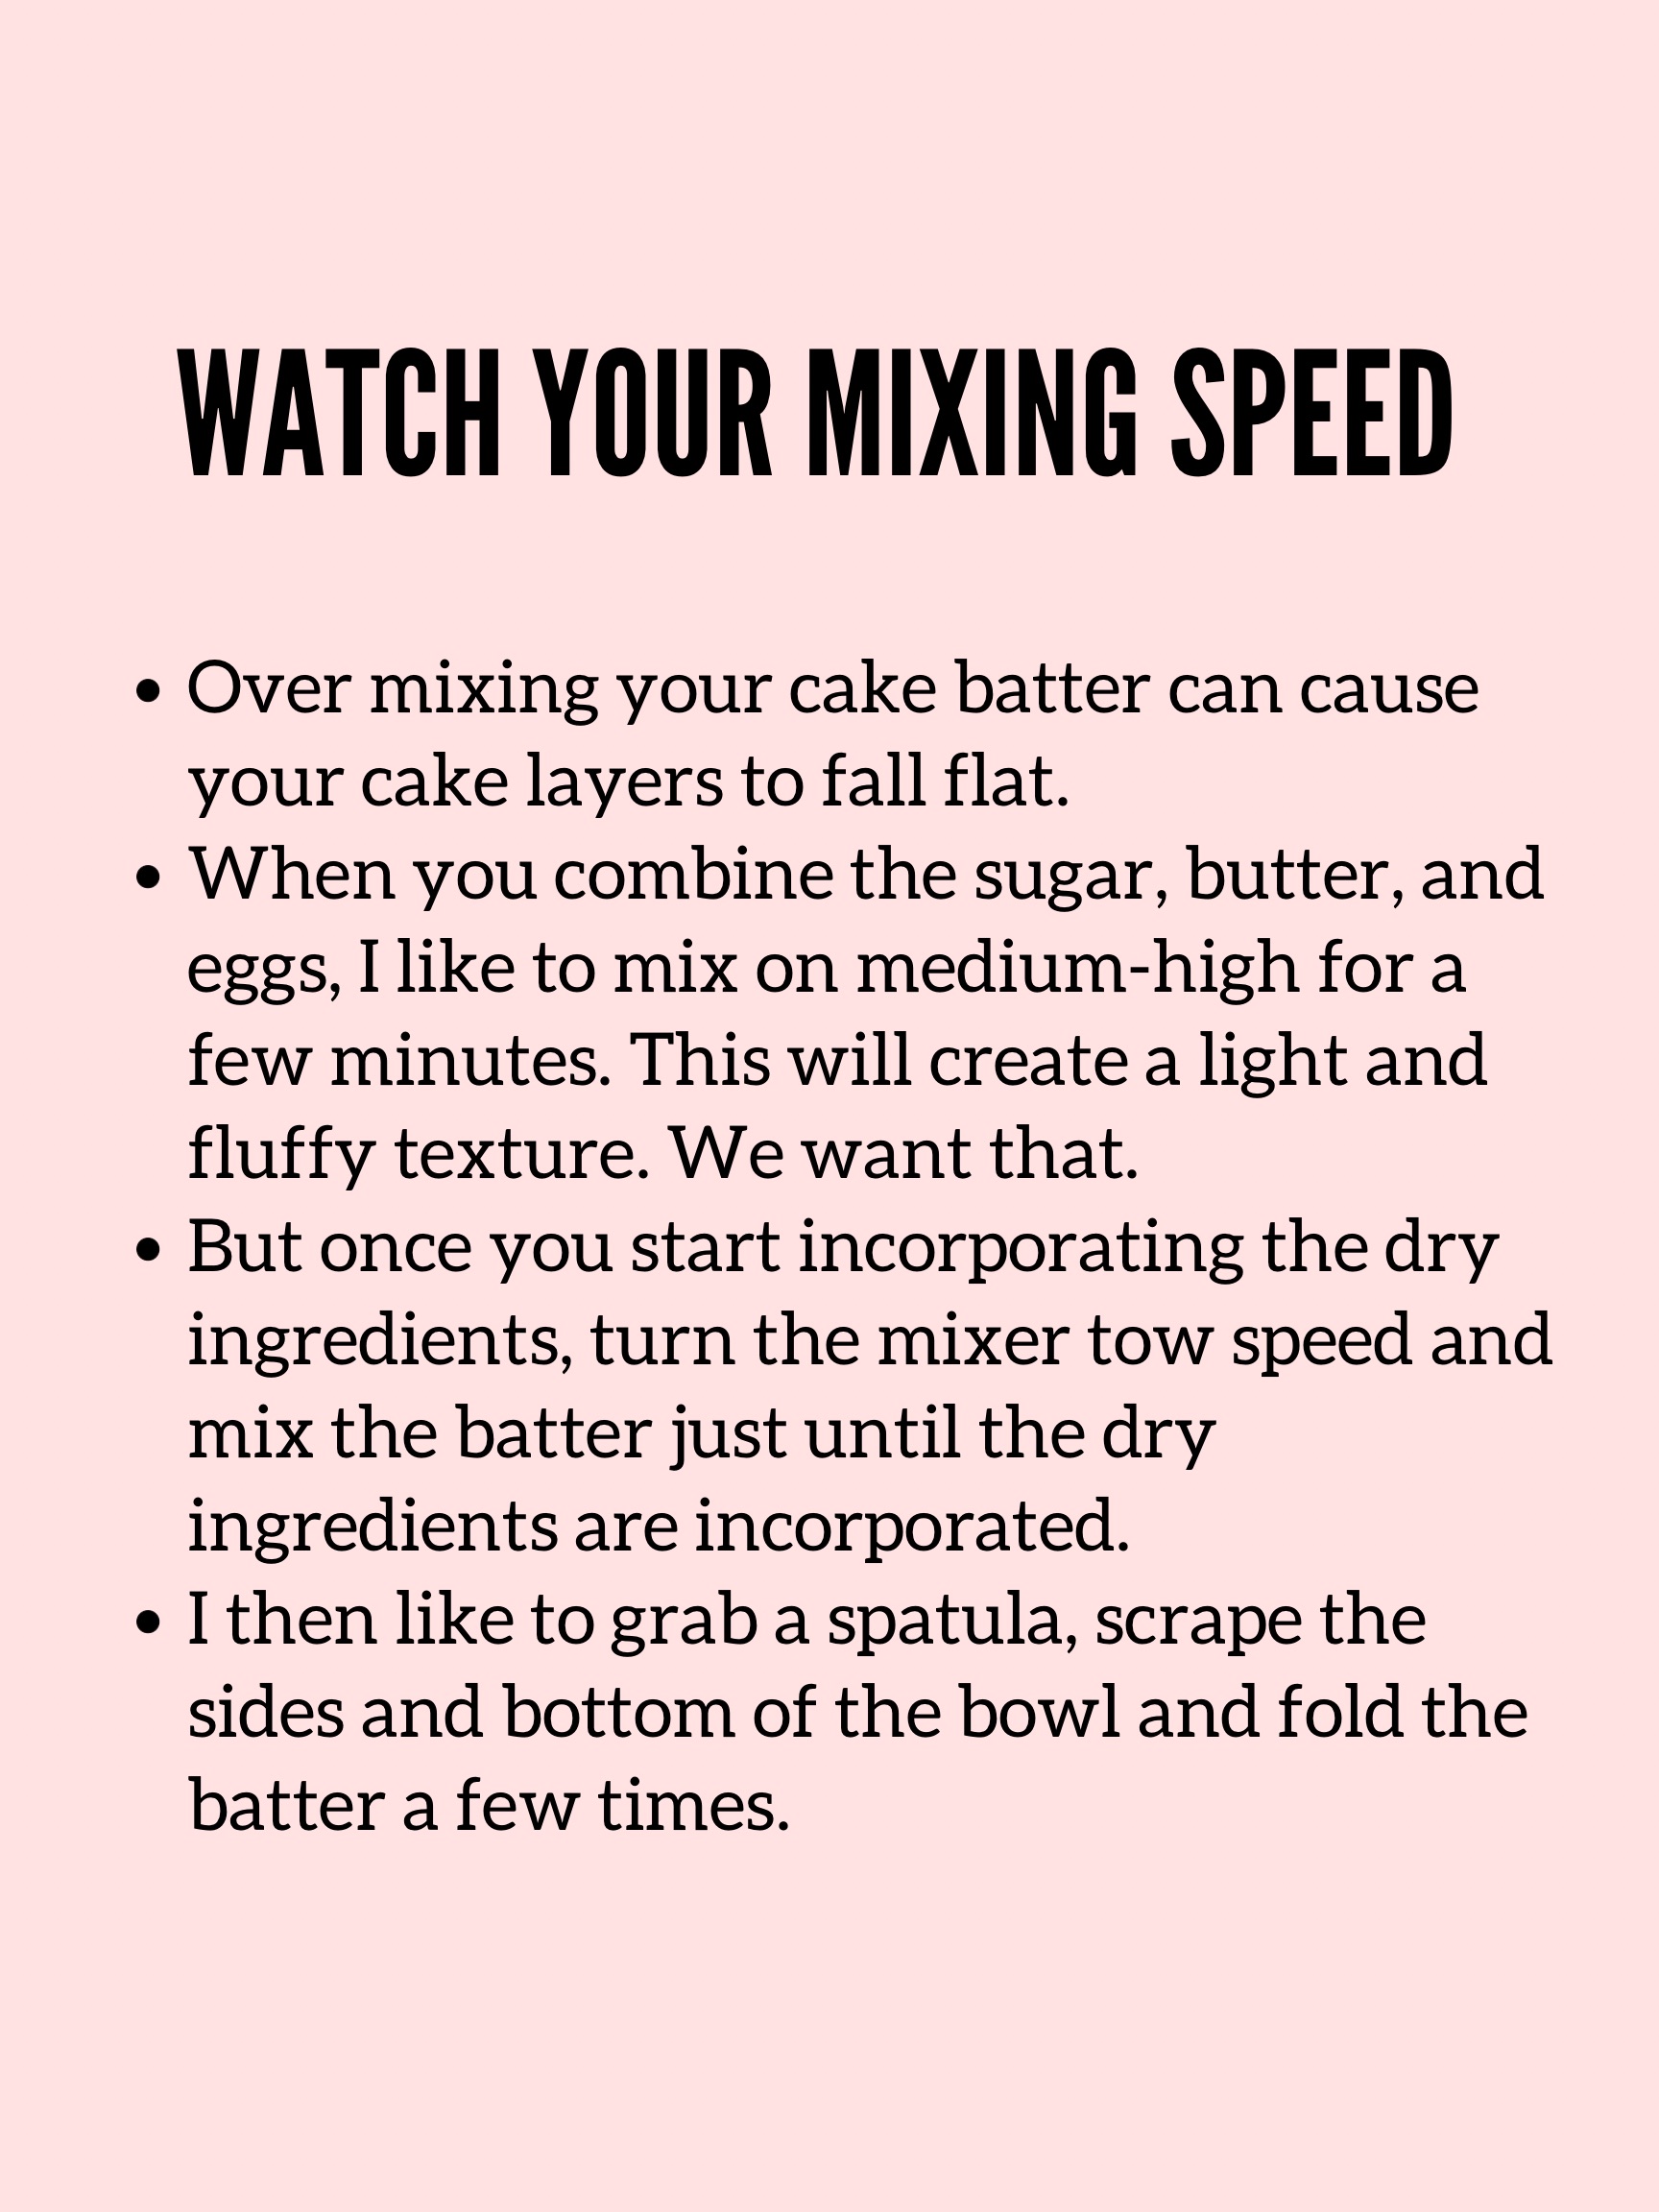 Don't over mix your cake batter